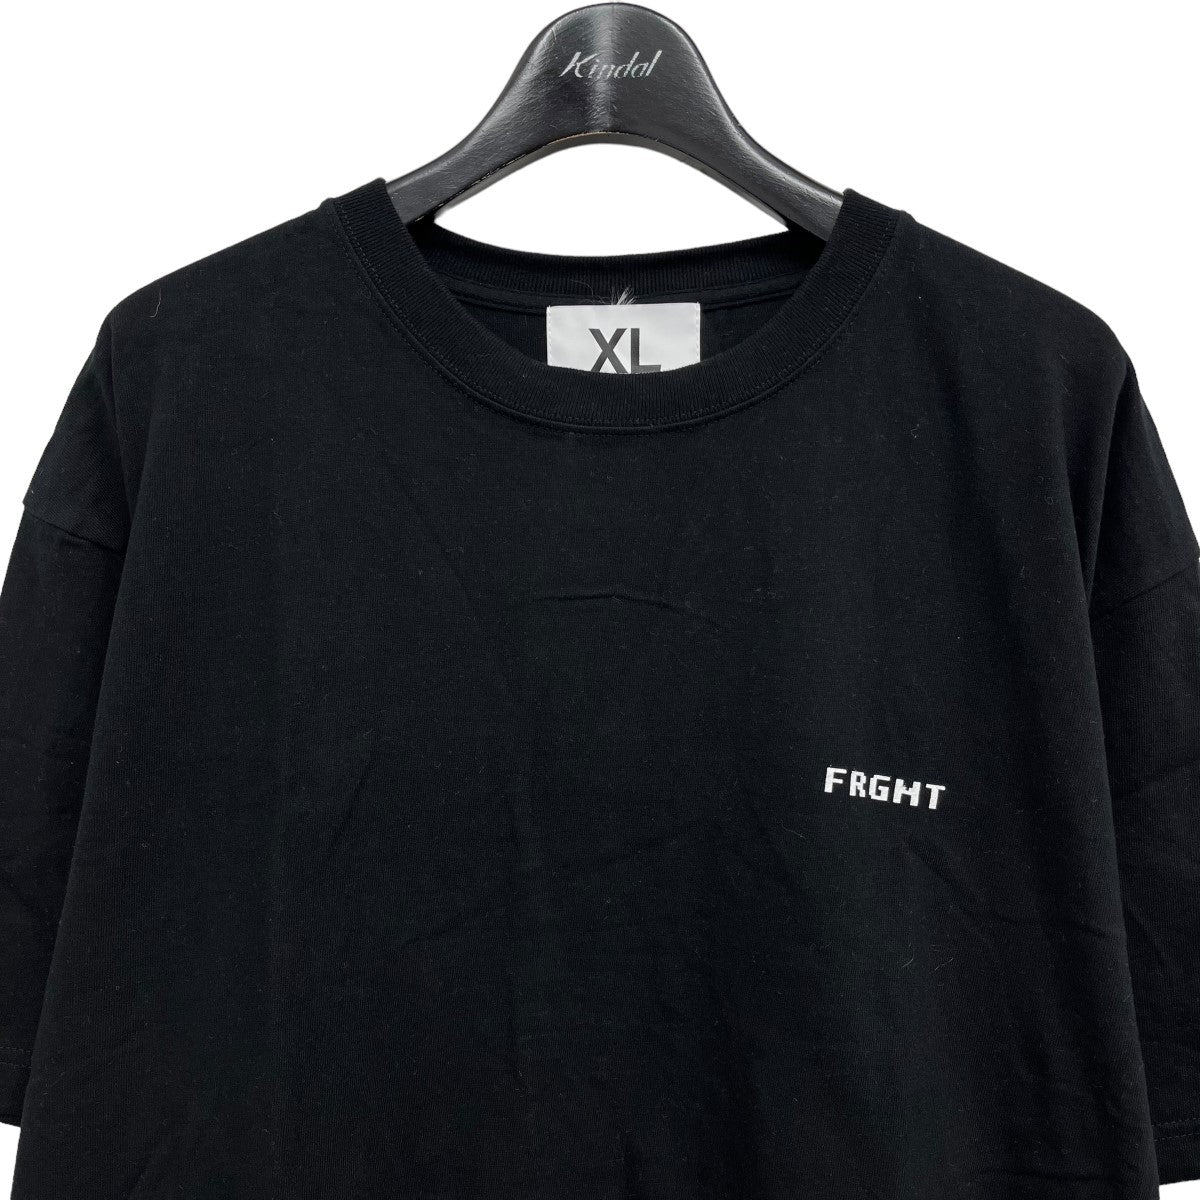 FRAGMENT(フラグメント) FORUM STORE MEMBER 限定 TEAM FRAGMENT S S TeeプリントTシャツ